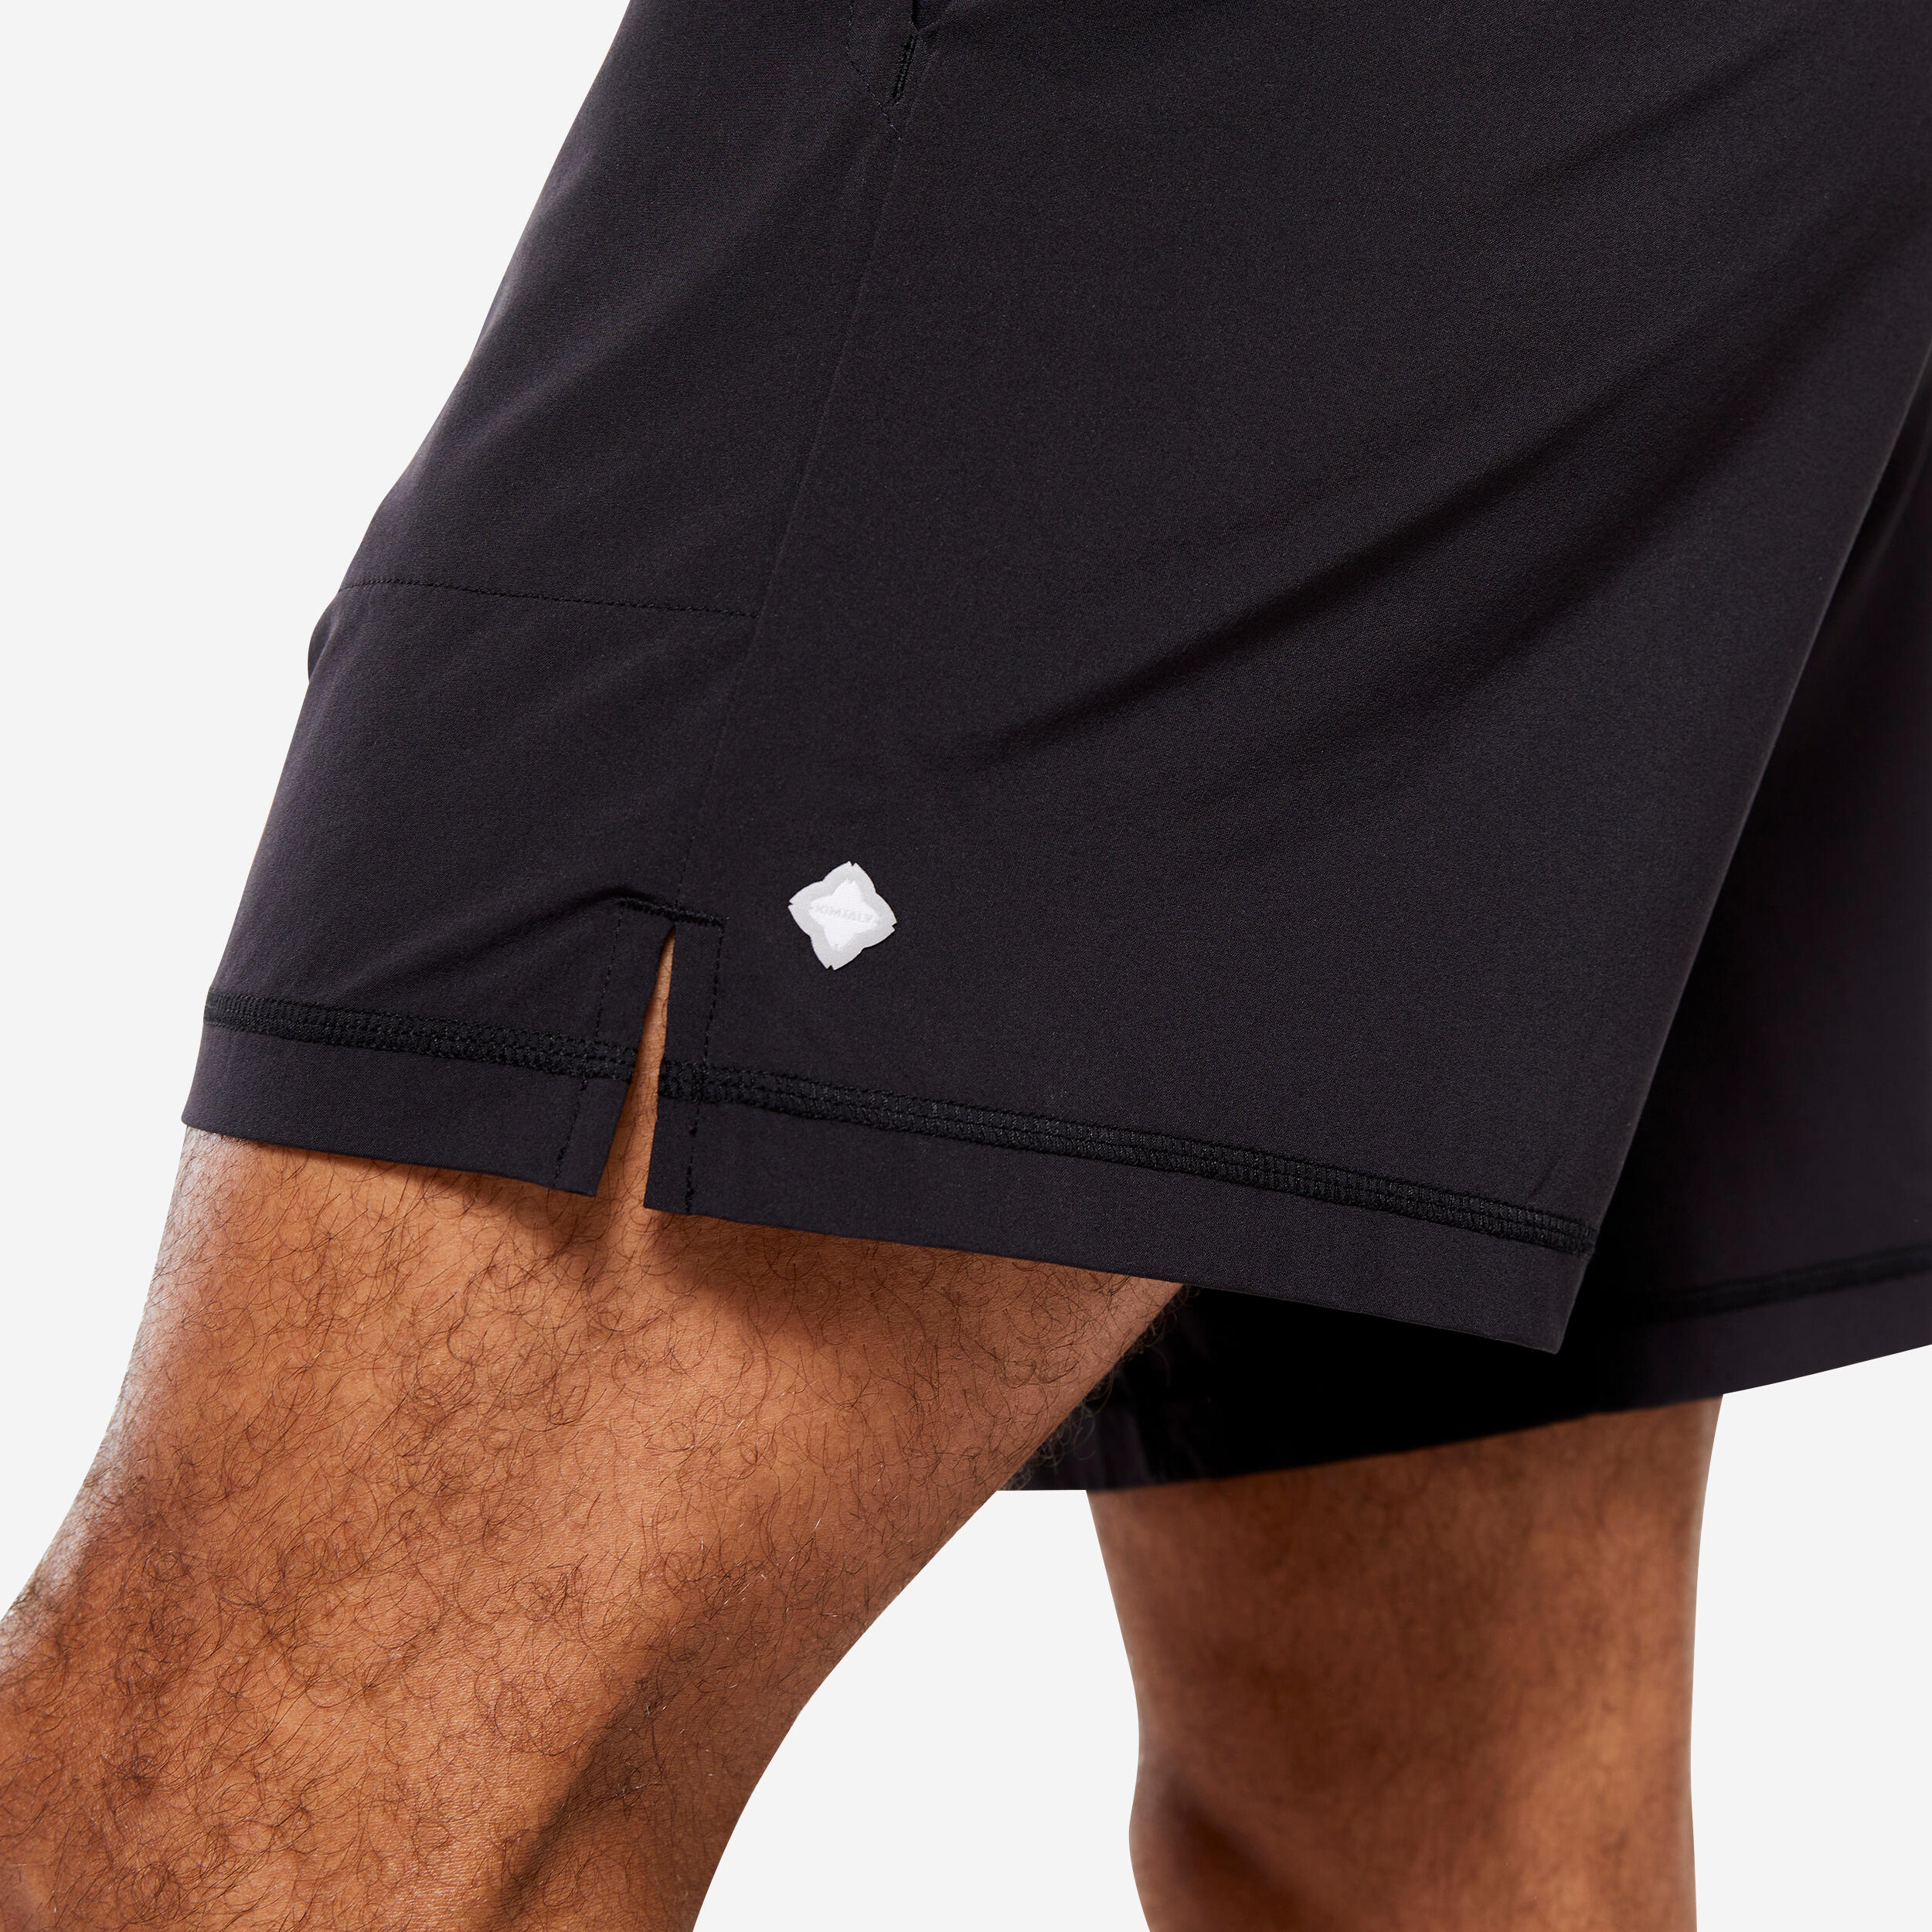 Men's Hot Yoga Ultra-Lightweight Shorts with Built-in Briefs - Black 6/6